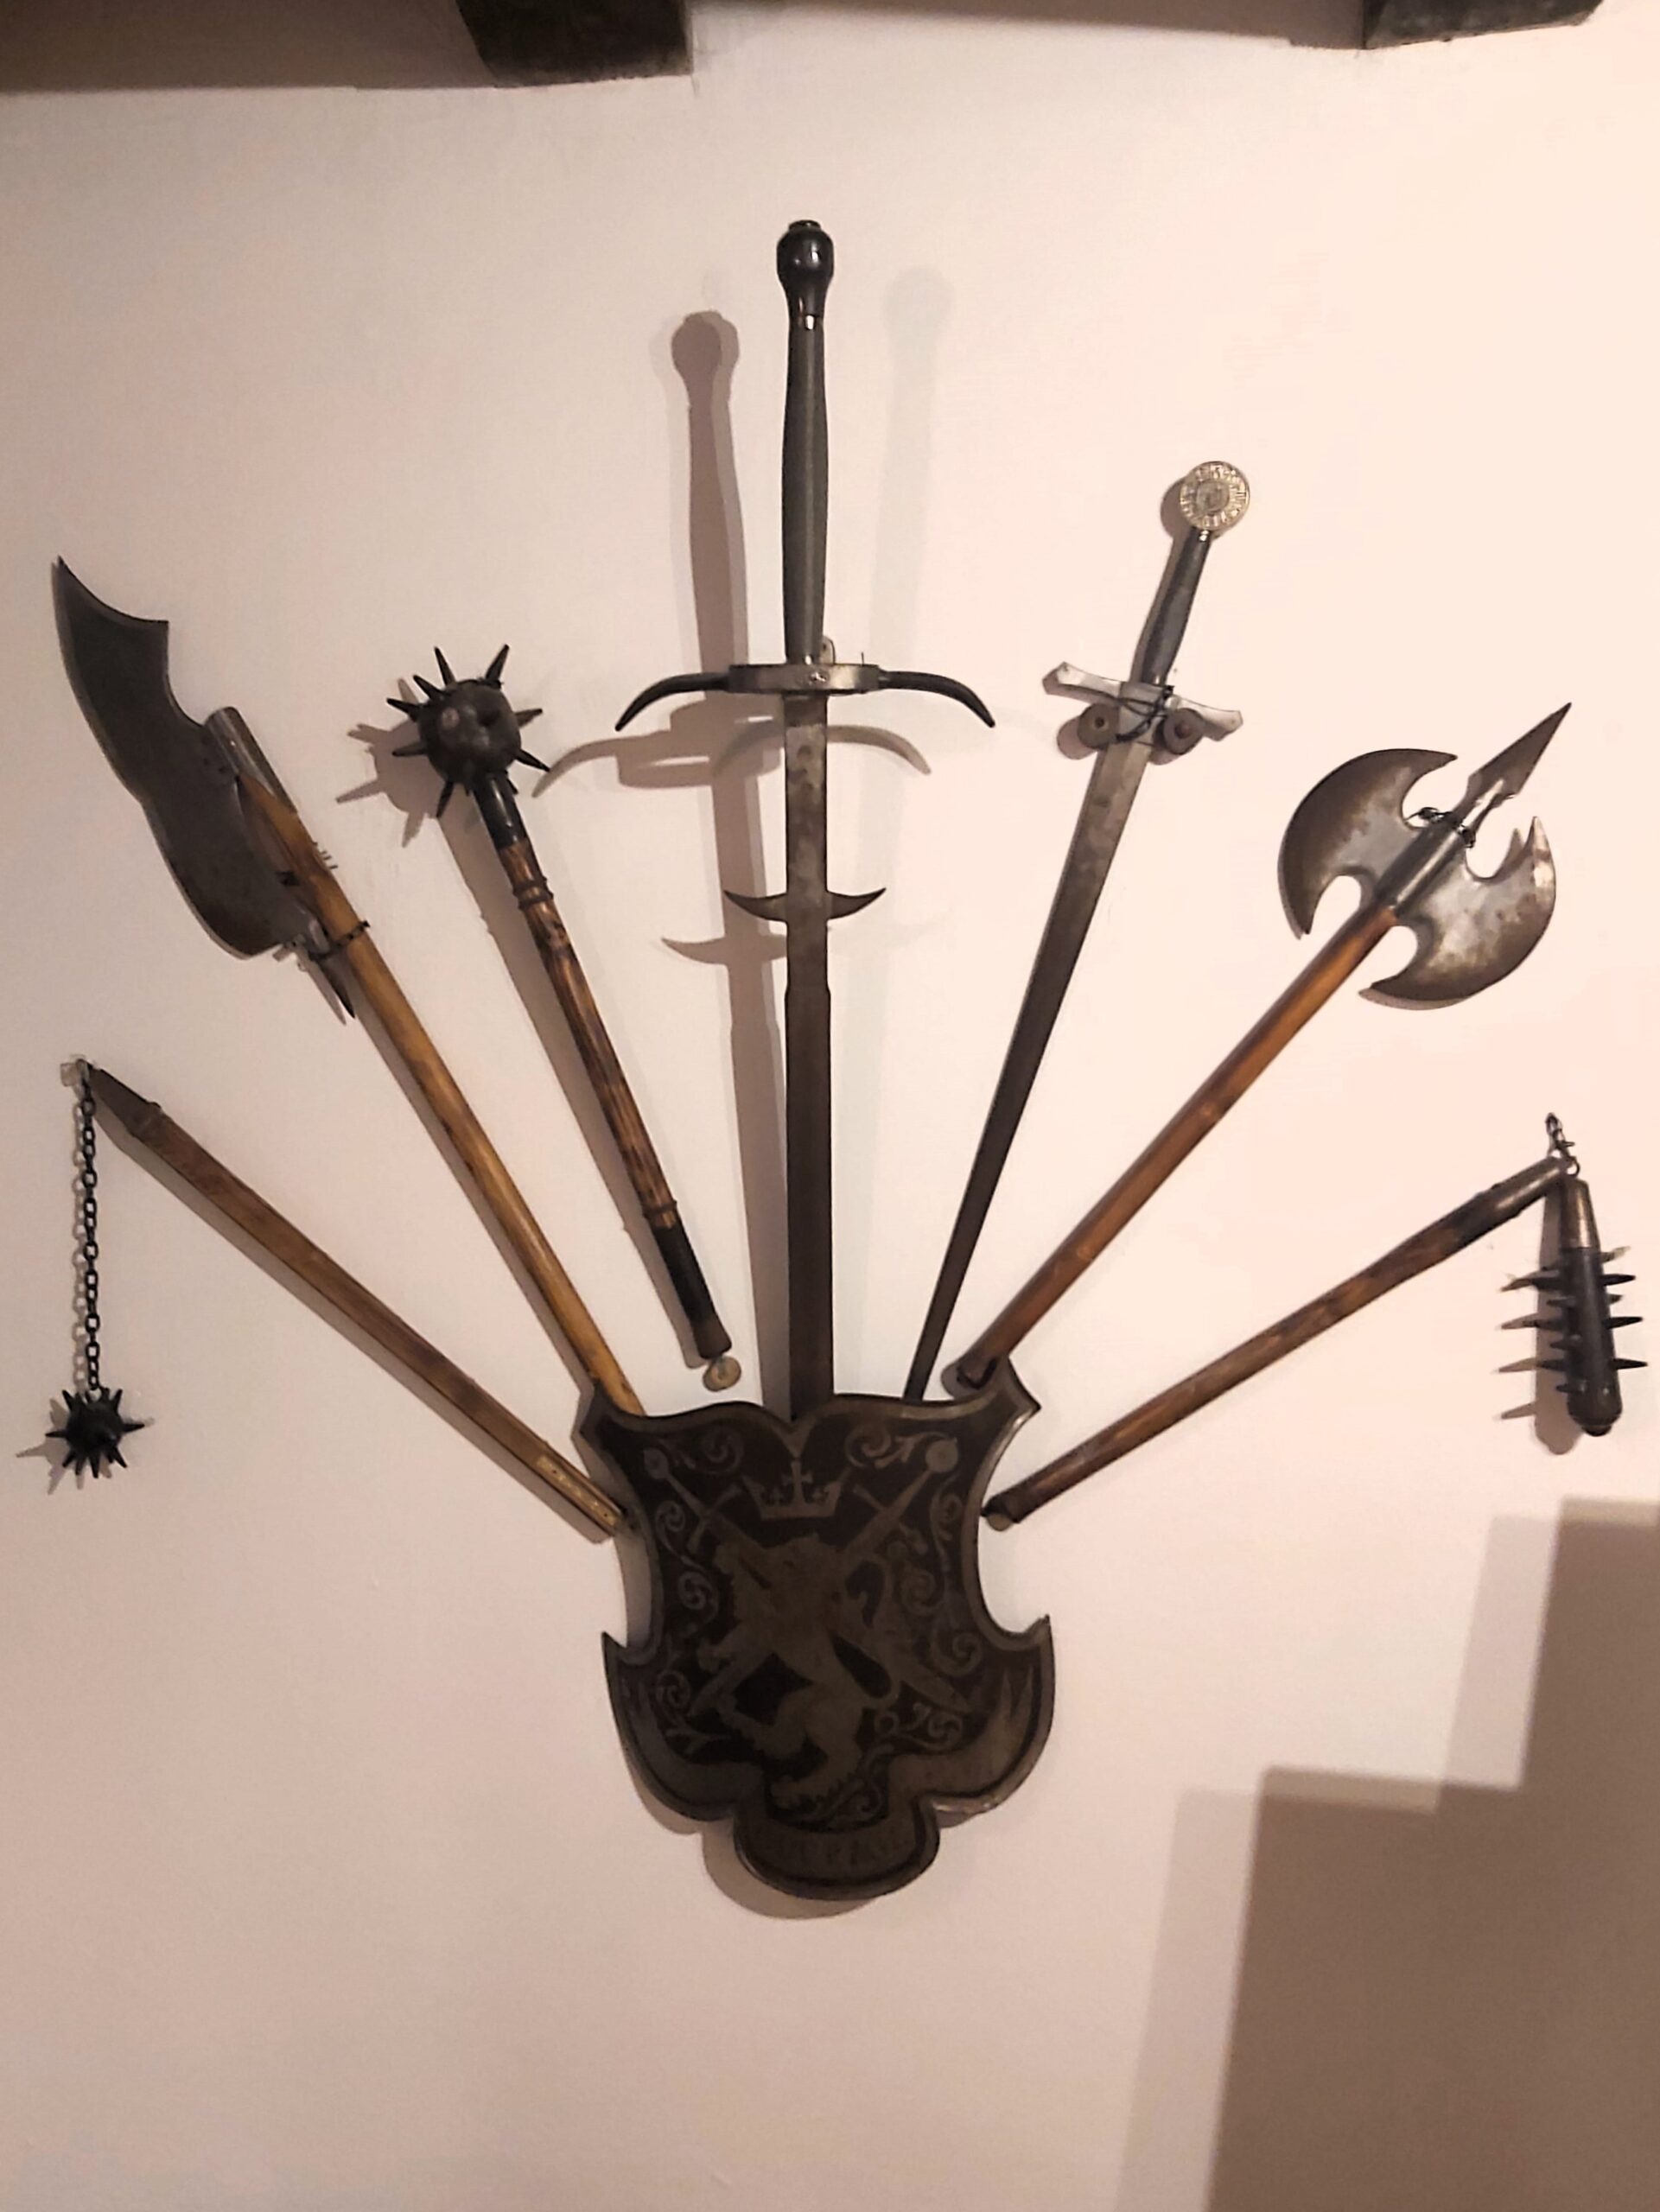 Multiple swords and flails in Bran Castle, Romania